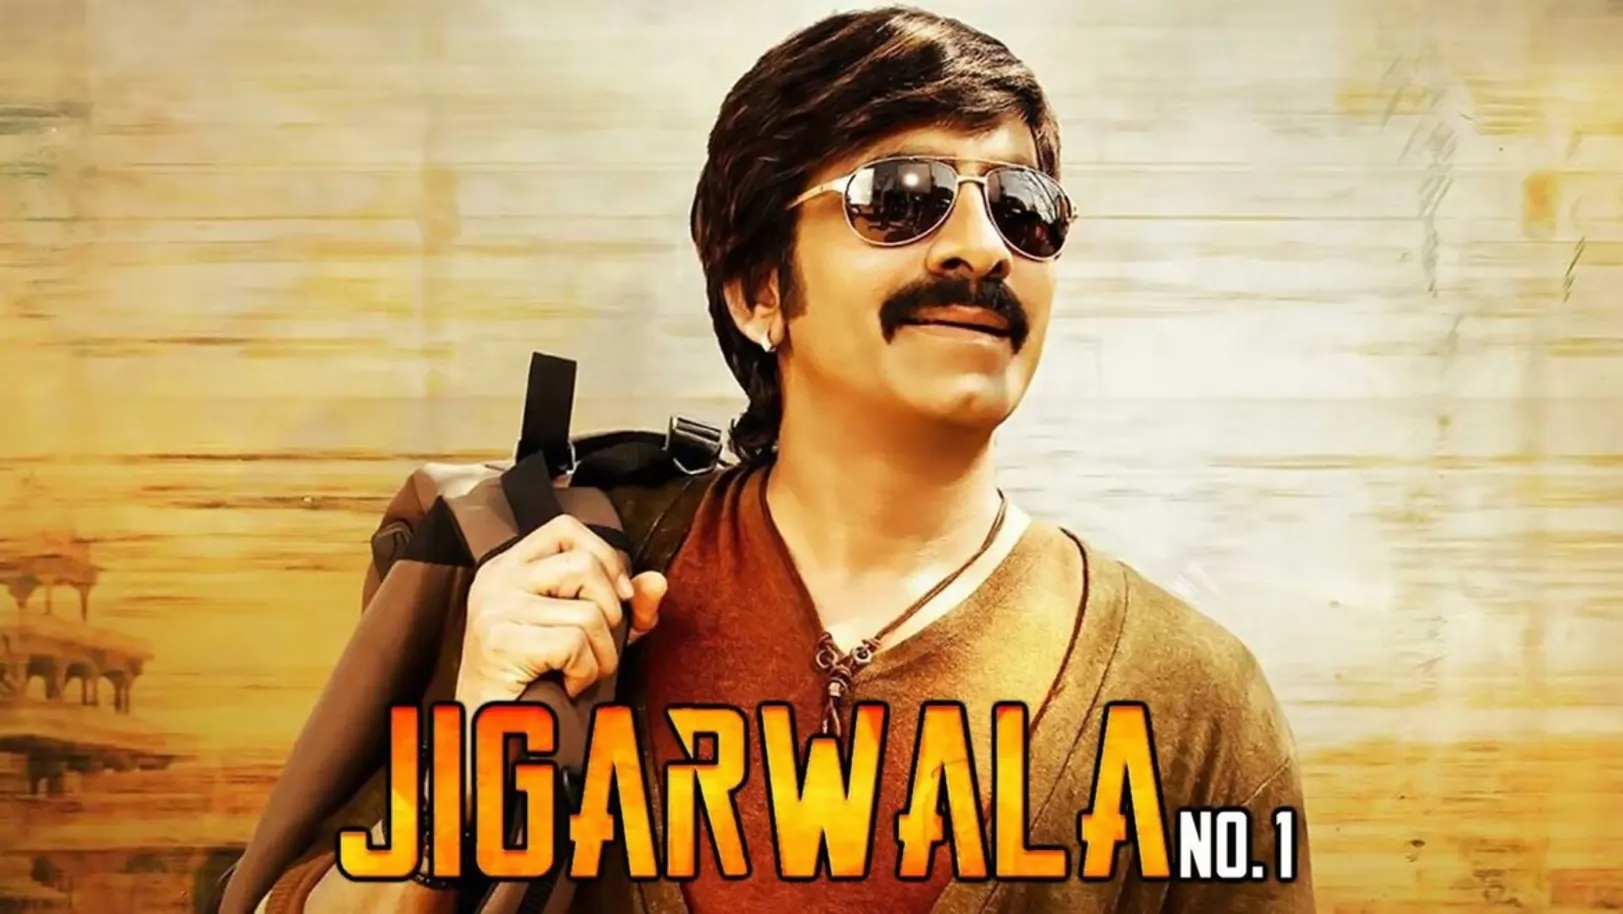 Jigarwala No.1 Streaming Now On Zee Action